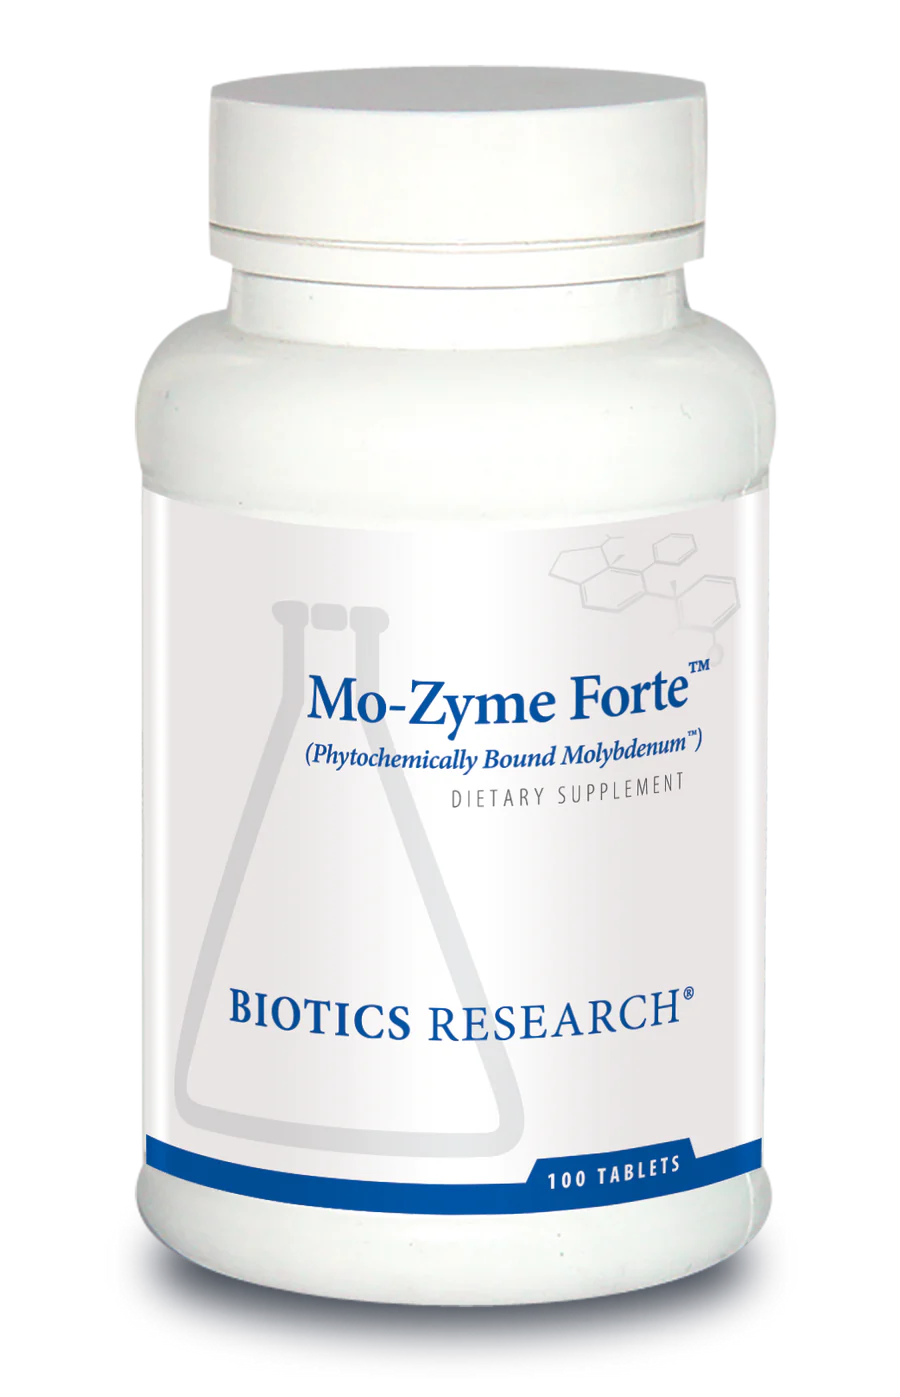 Biotics Research Mo-Zyme Forte